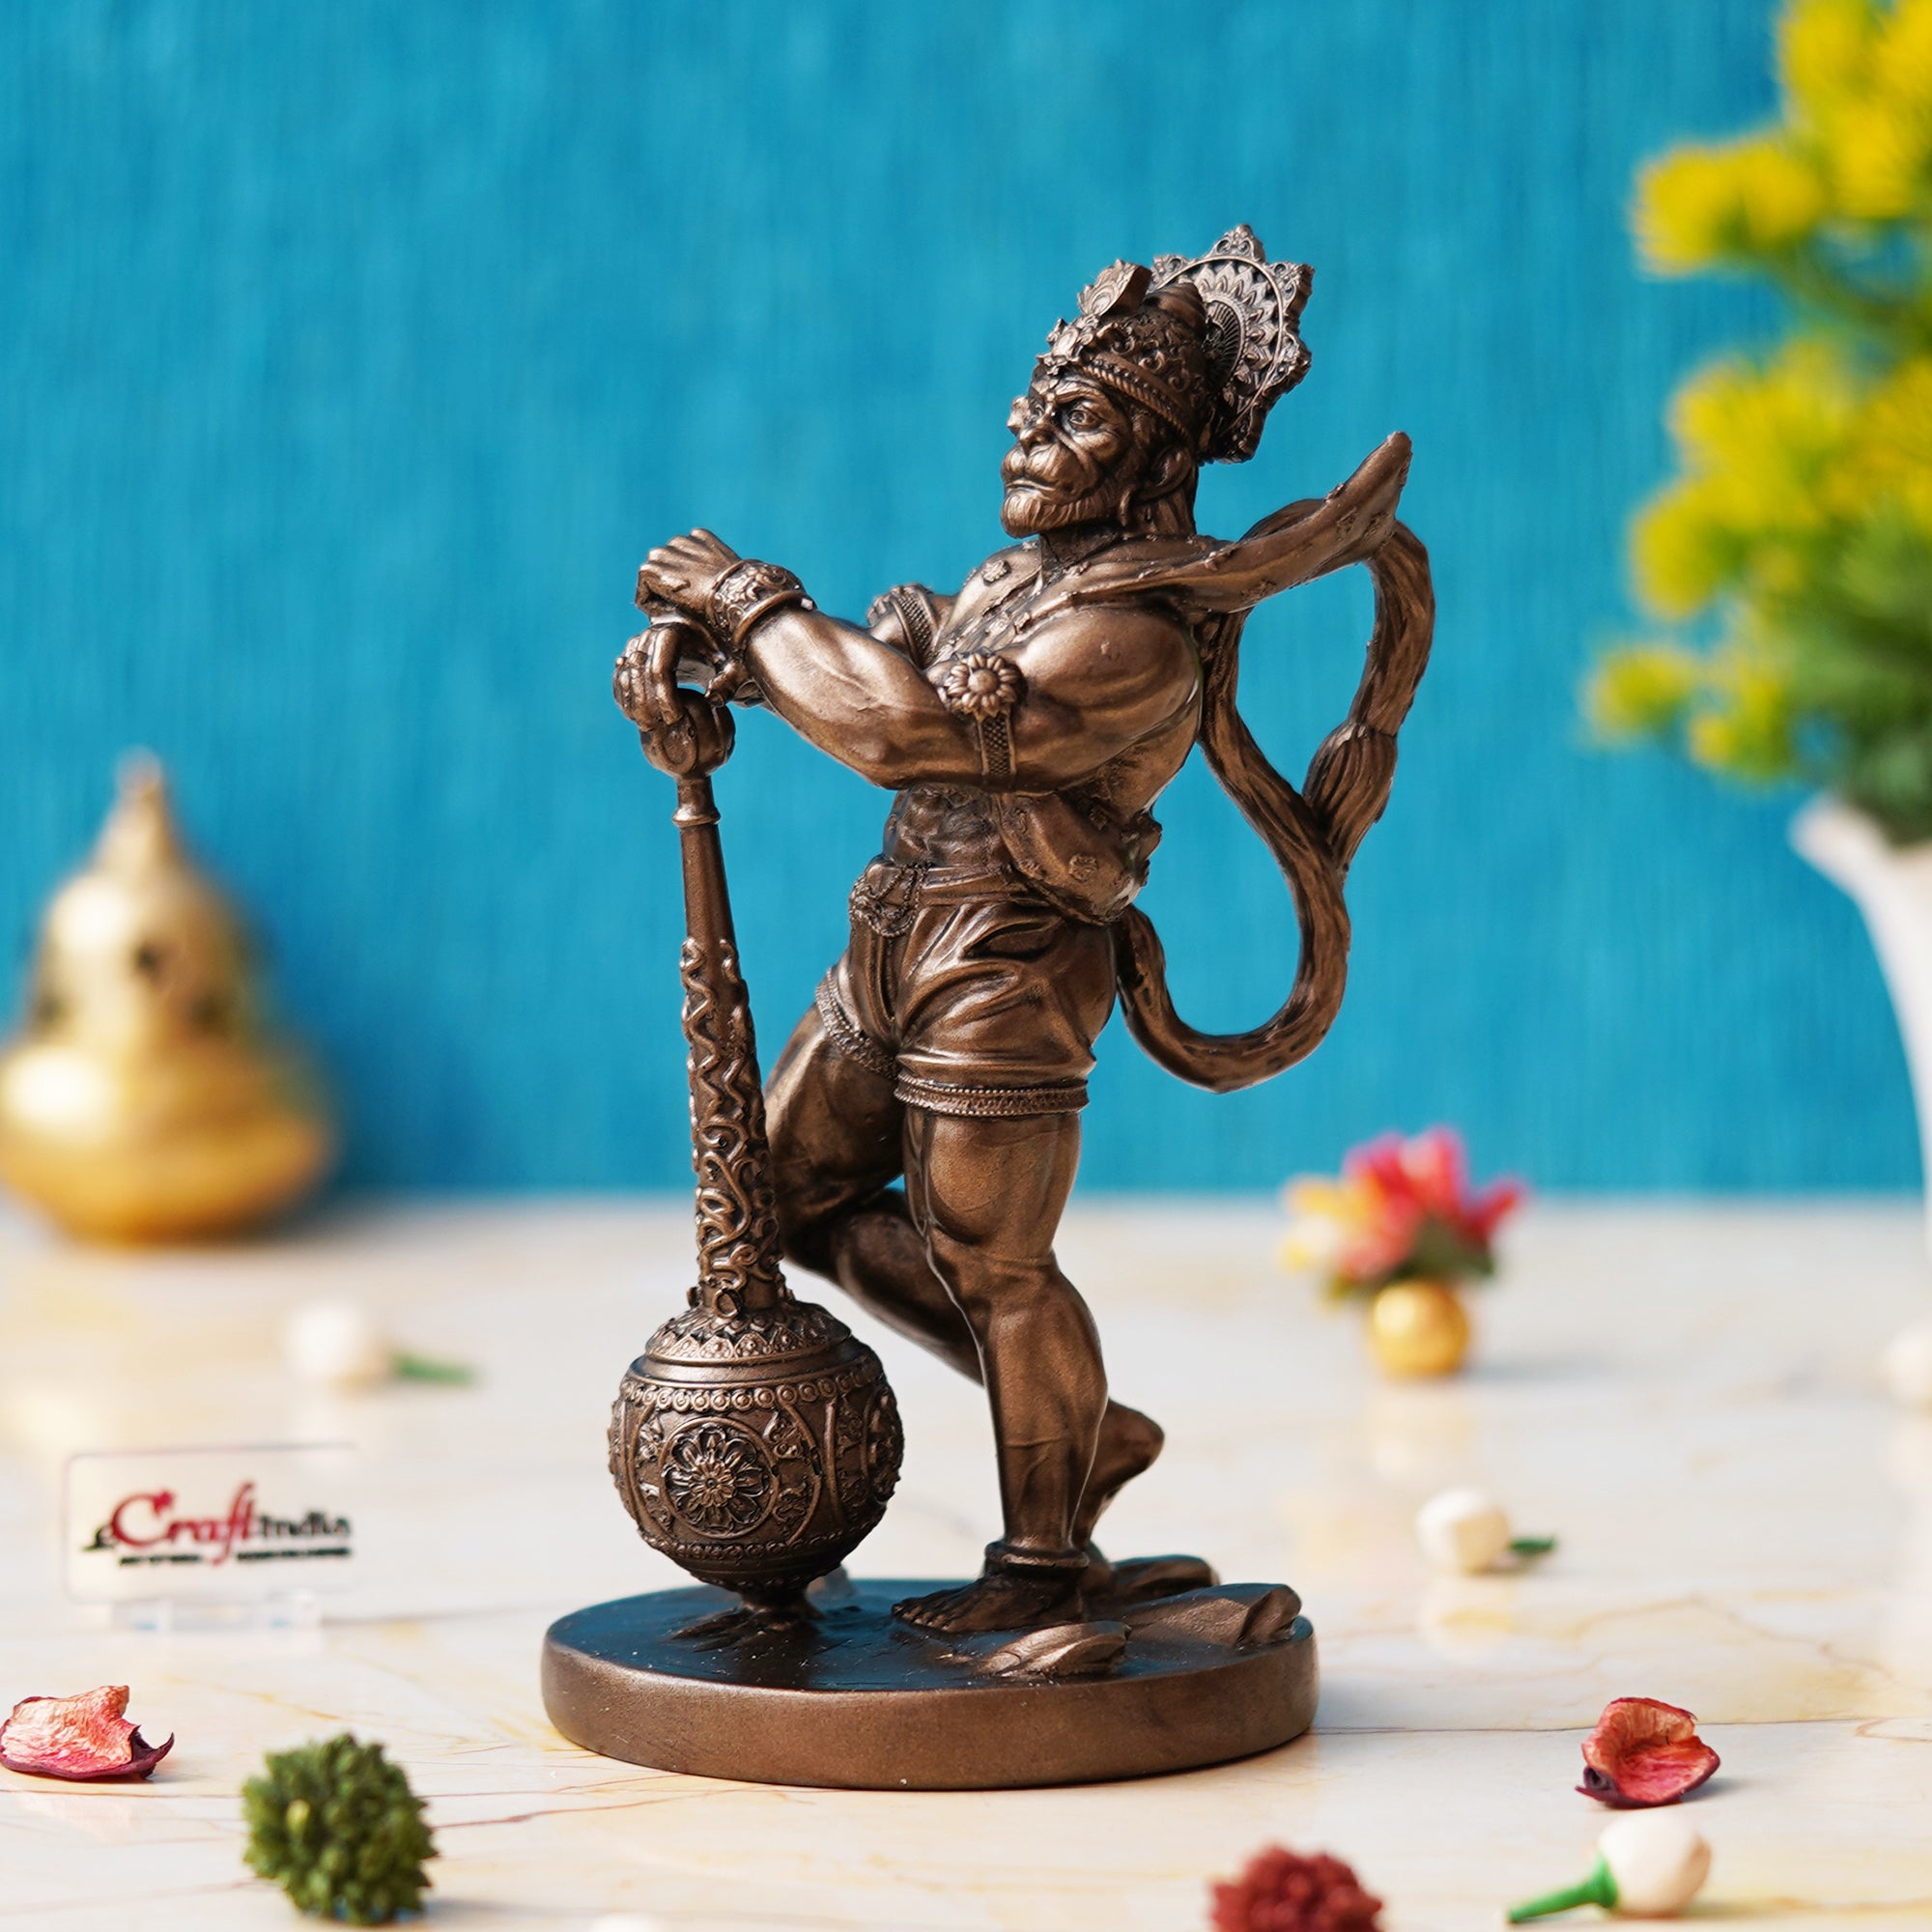 Golden Polyresin Handcrafted Standing Lord Hanuman Statue with Gada/Mace 1